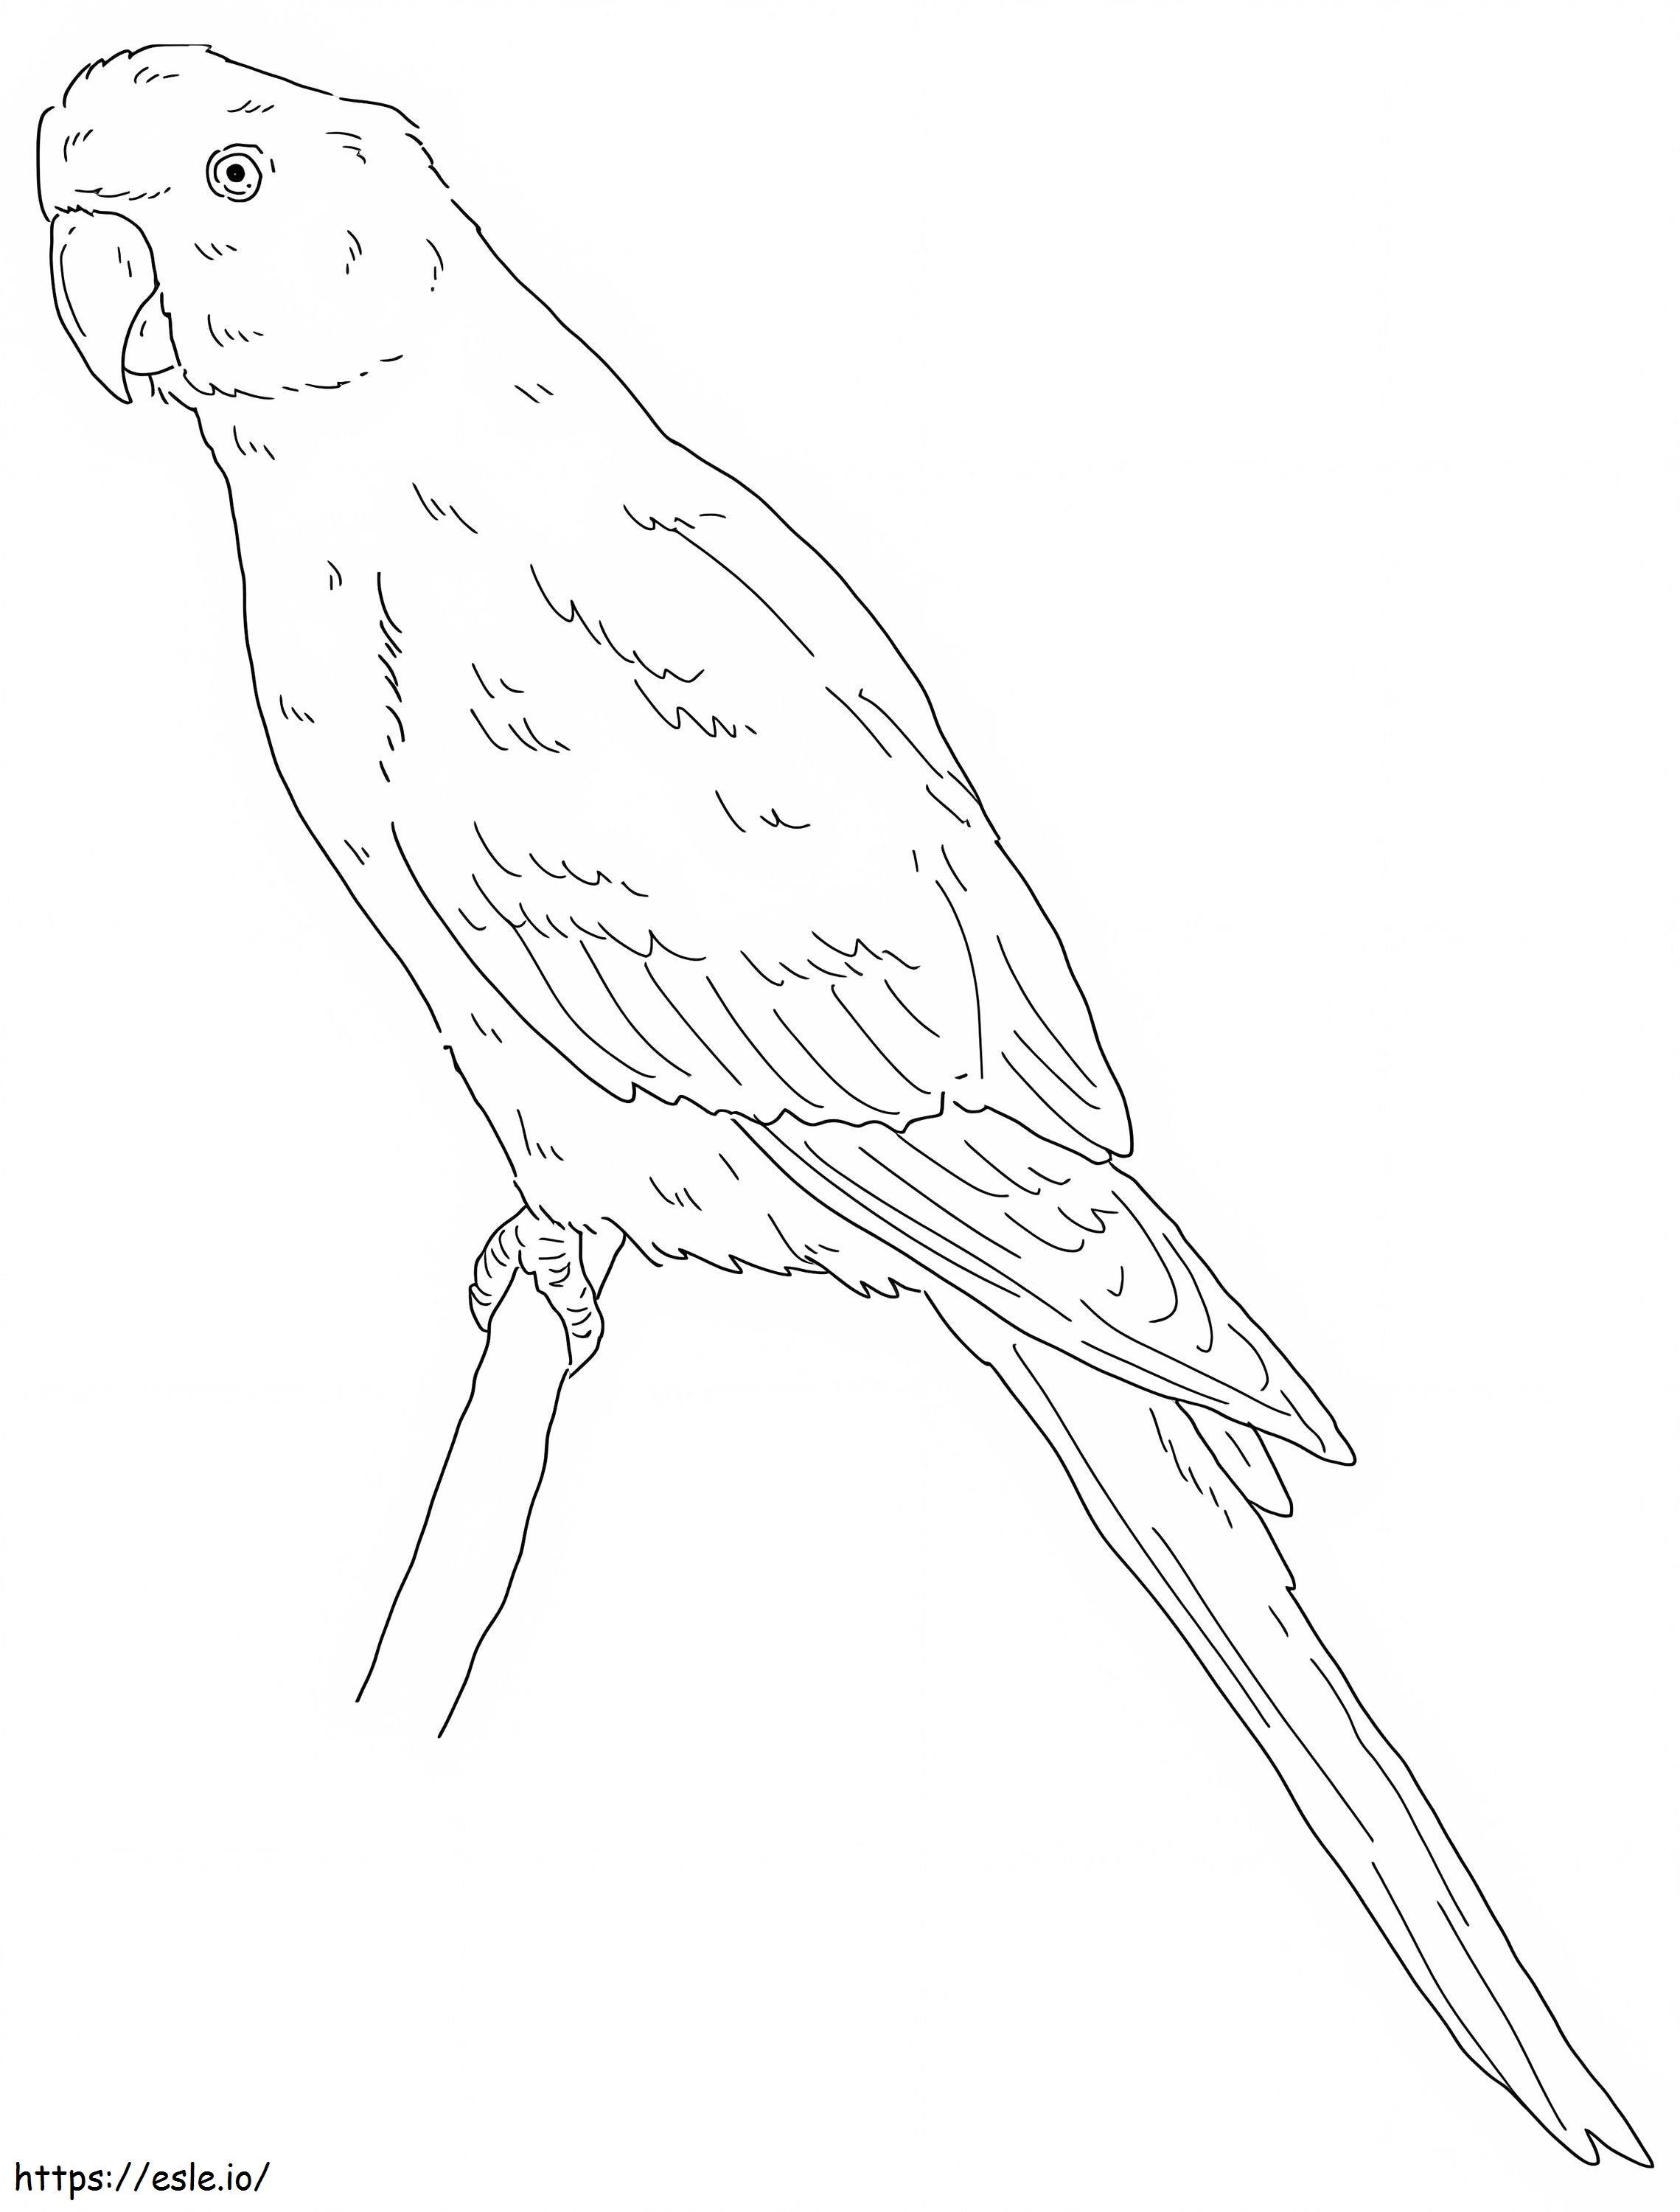 Seychelles Parakeet coloring page